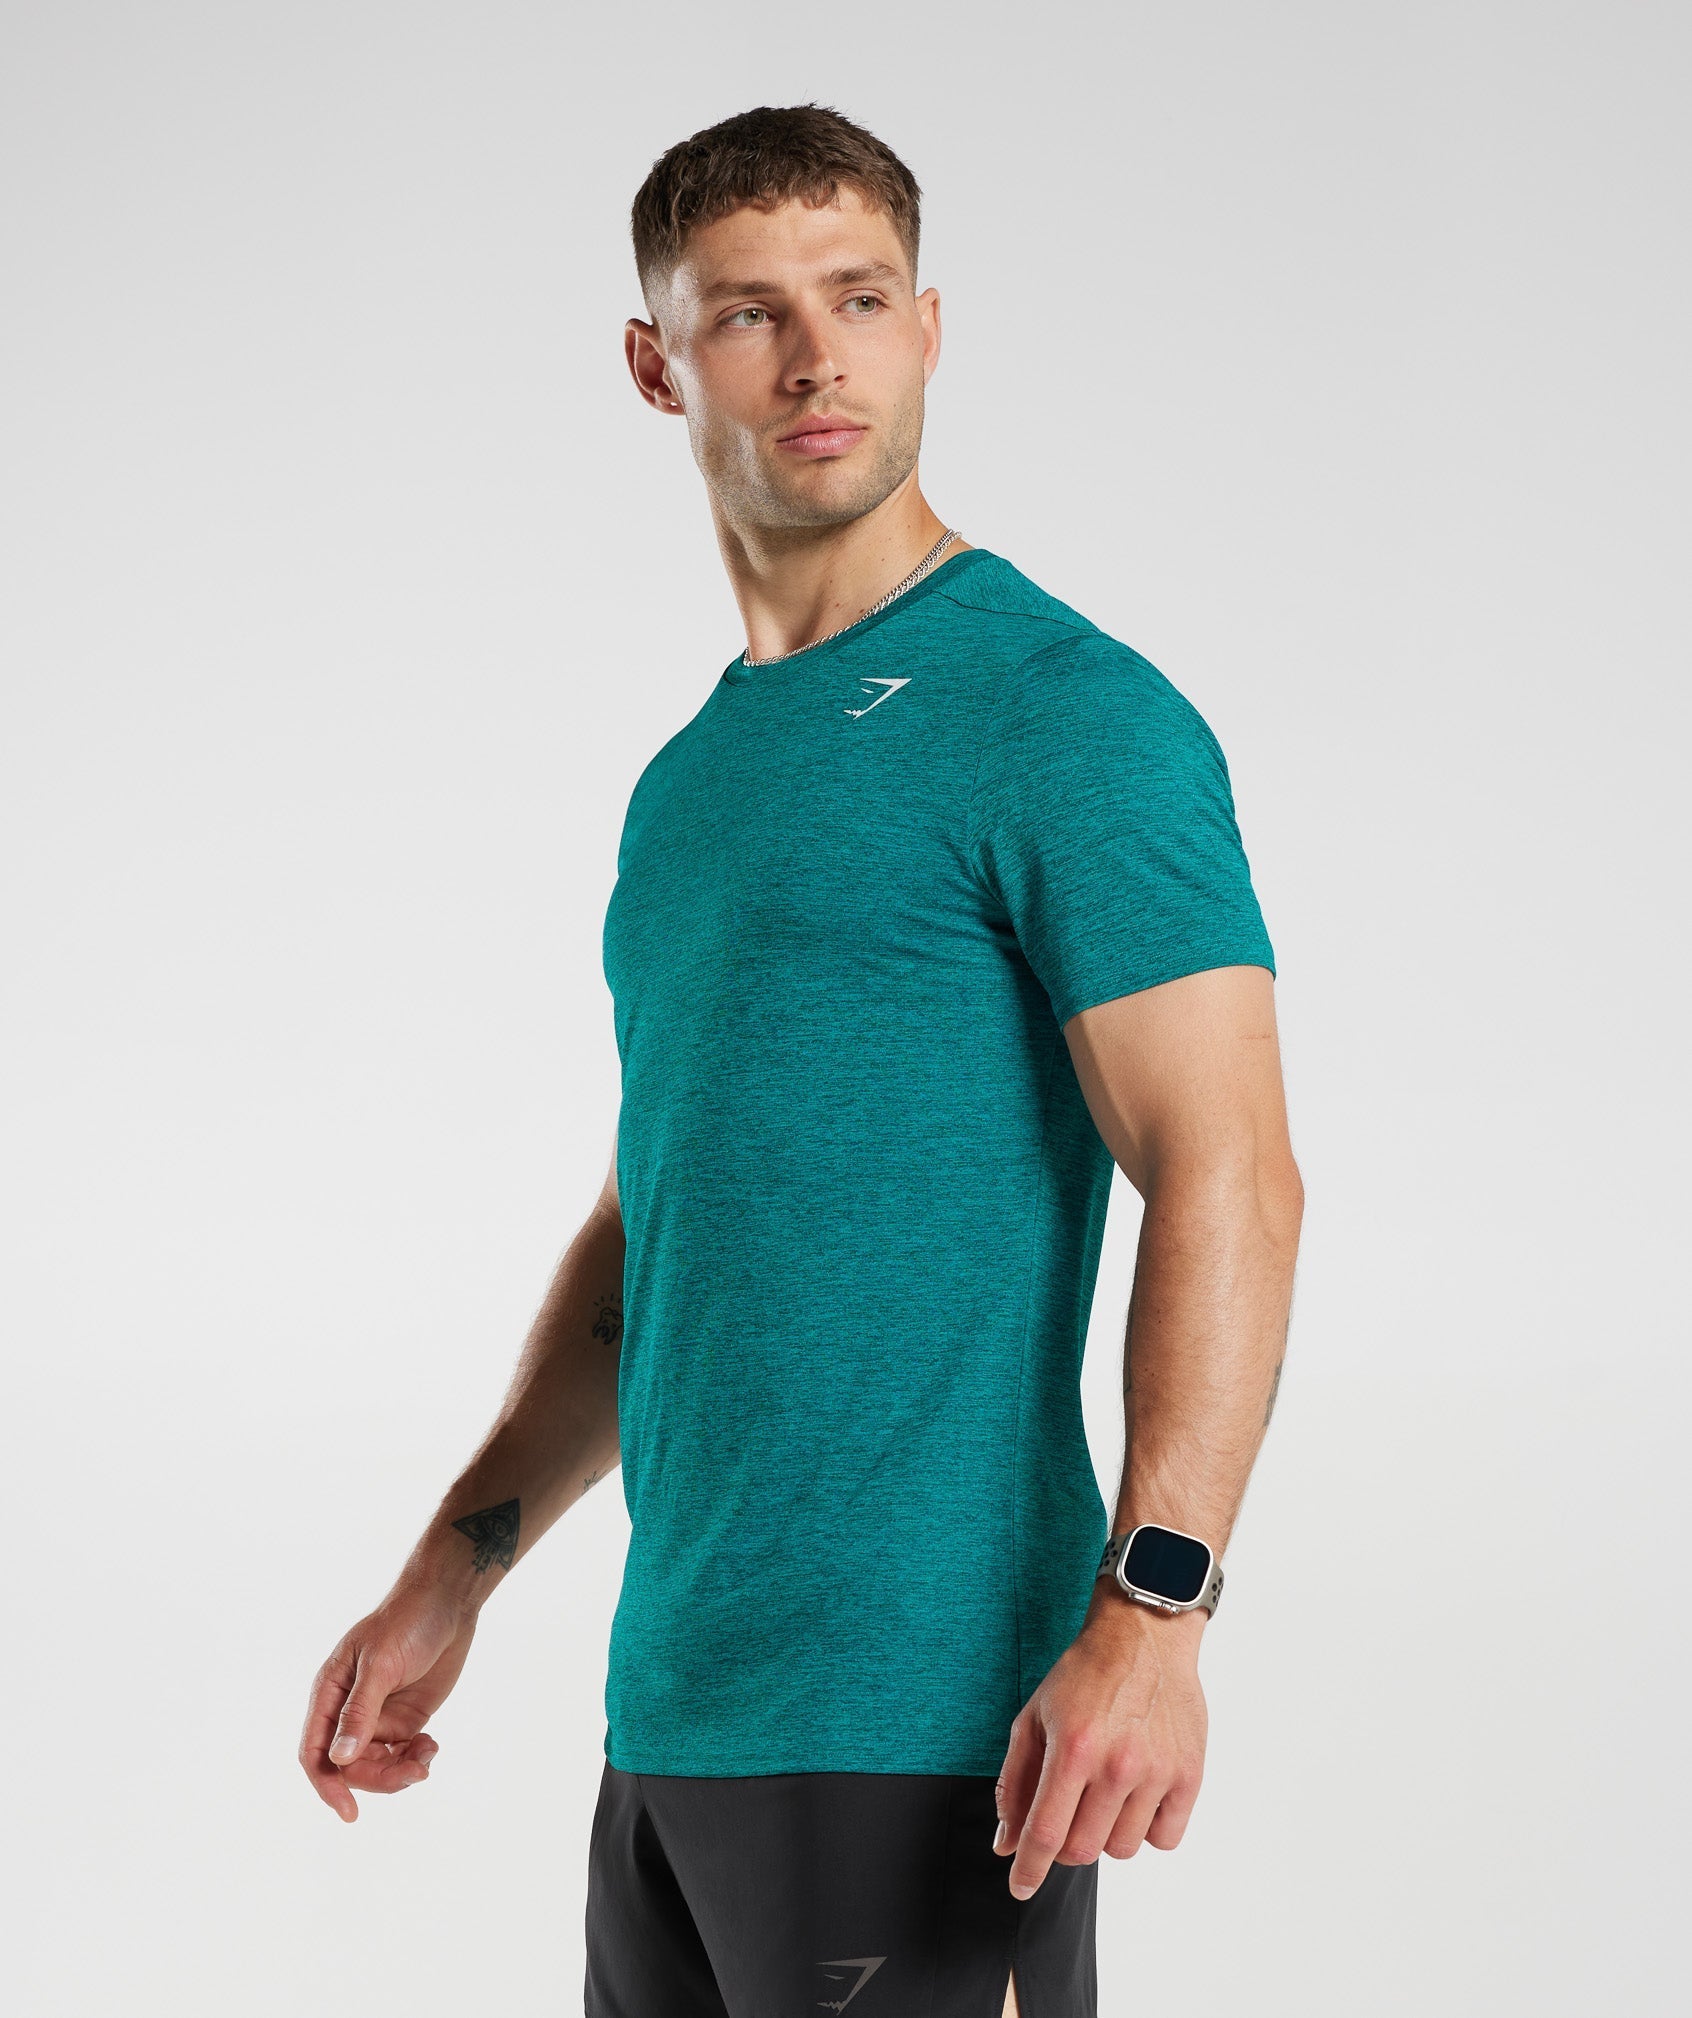 Gymshark Arrival T-Shirt - Toasted Brown